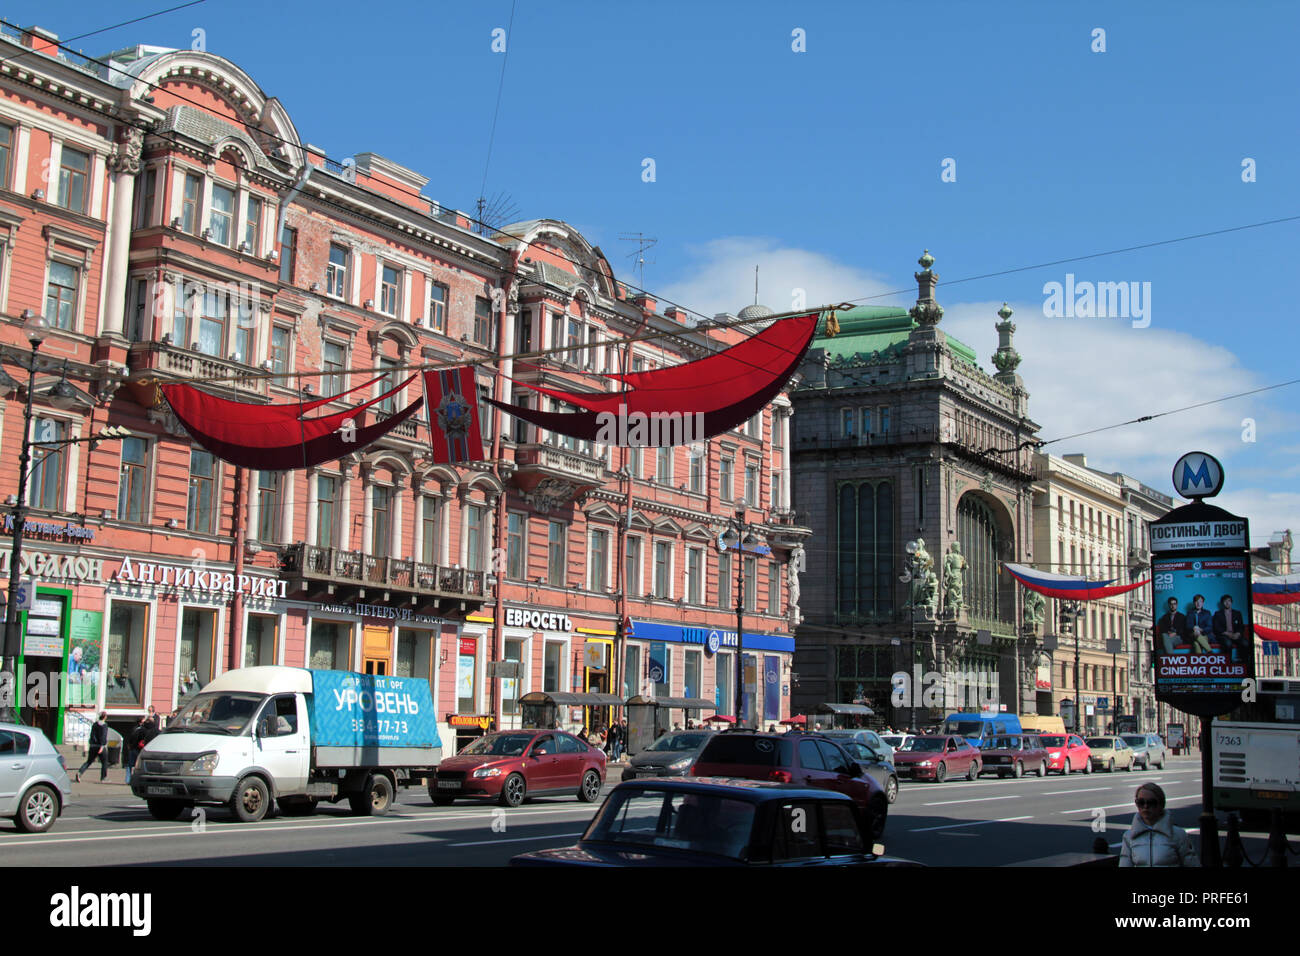 Some of the grand, colourful buildings on Nevsky Prospekt, which is the main thoroughfare in St Petersburg, Russia. Stock Photo